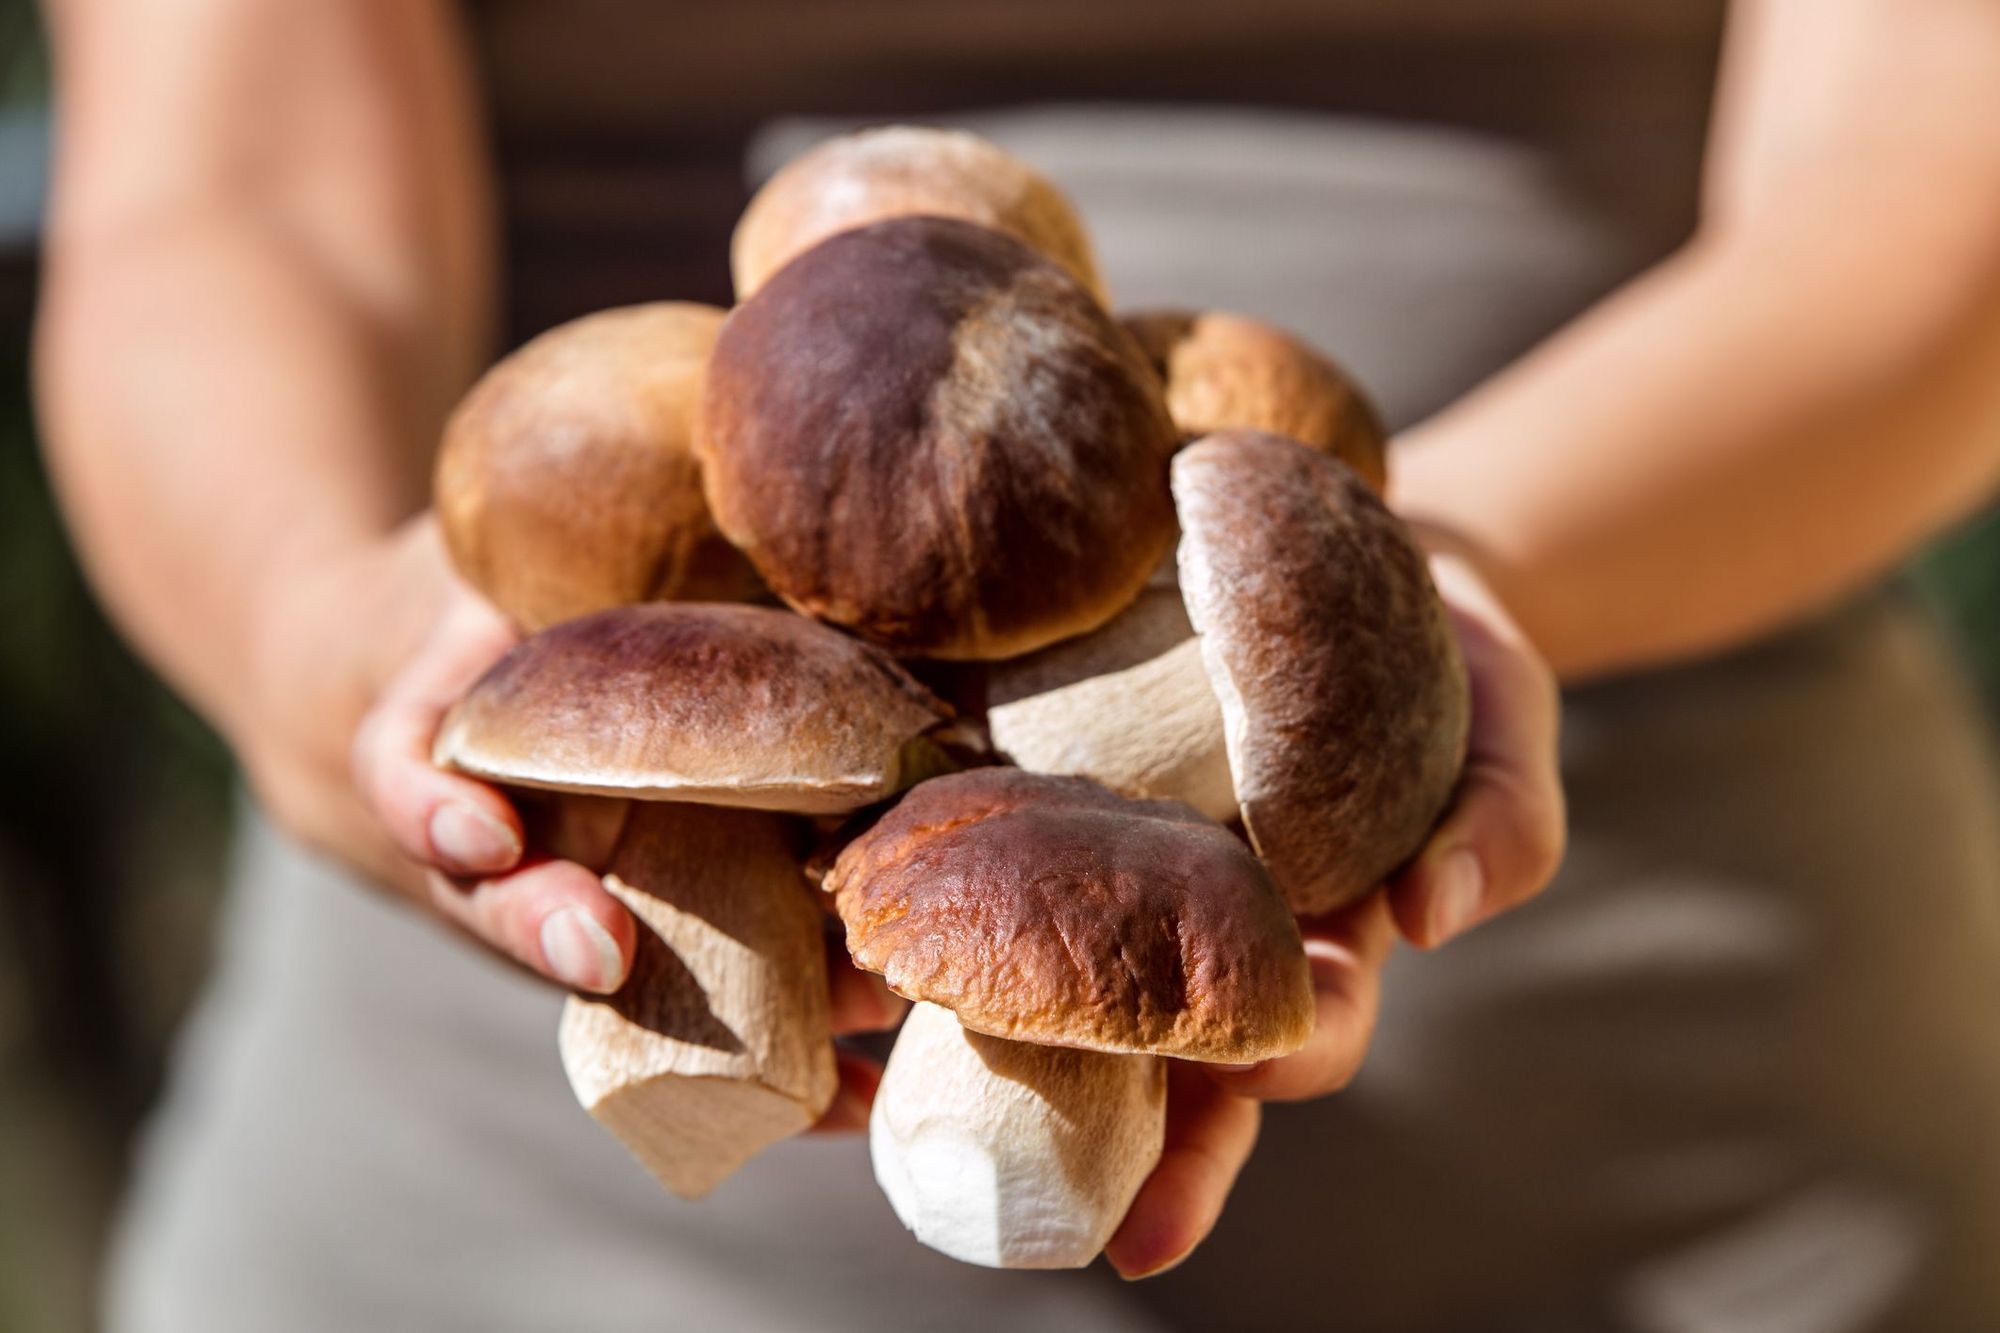 Why We Swapped Urban Life to Forage for Mushrooms